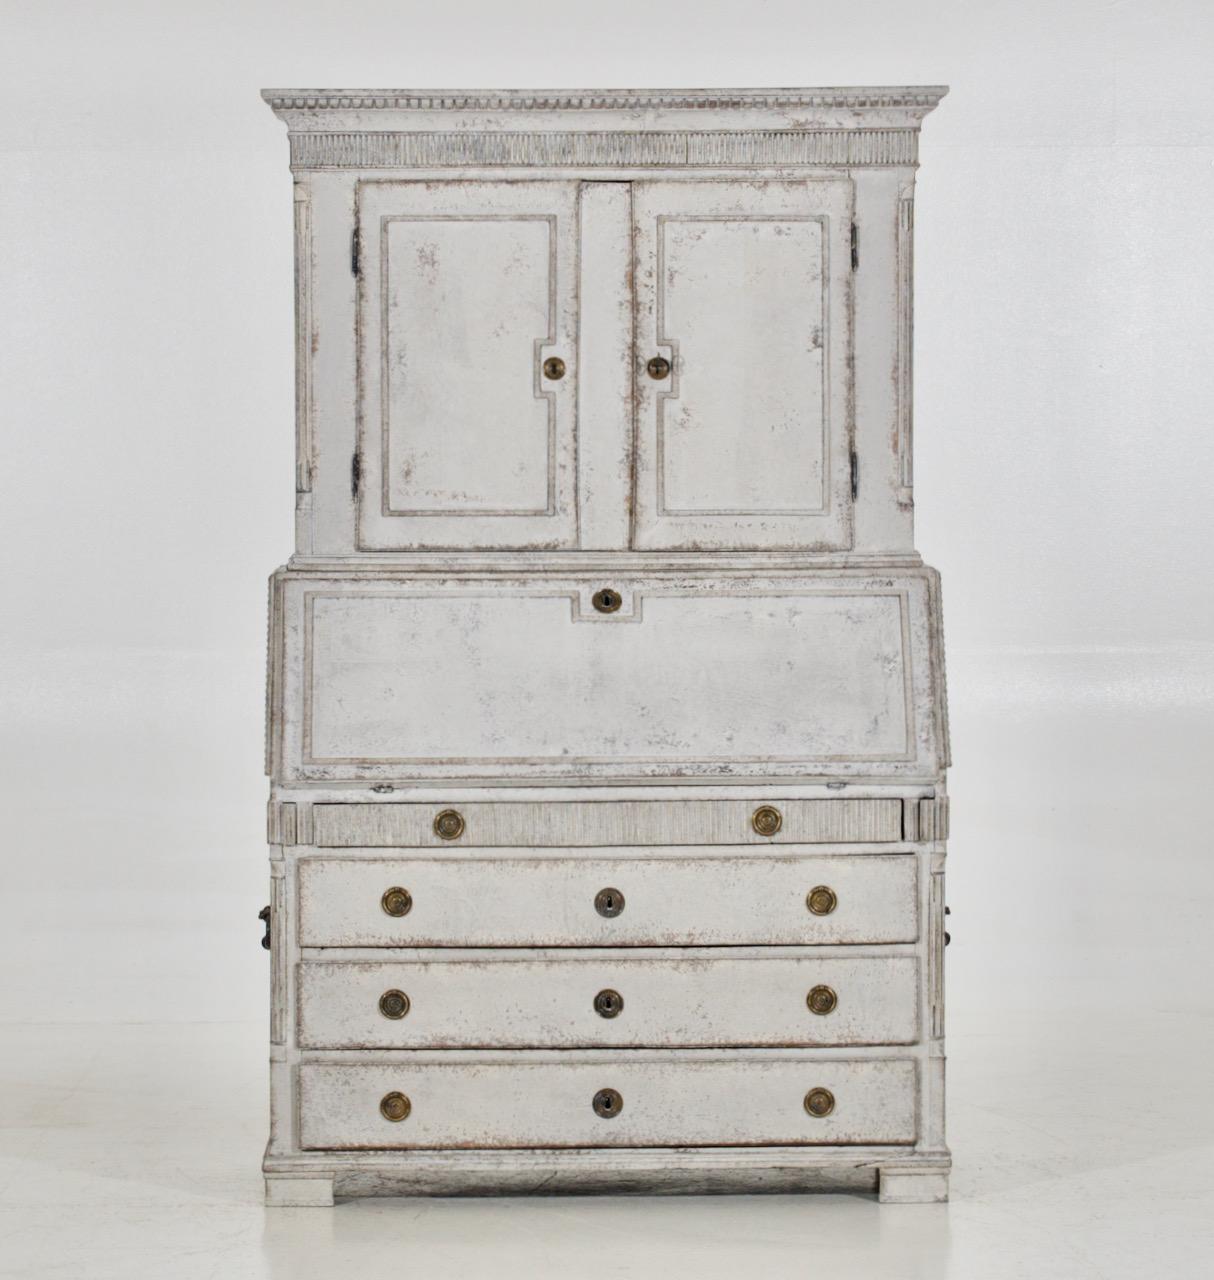 Gustavian two-parts bureau, richly carved, original hardware, lock and handles in both sides, circa 1790 - 1810
Measures: H. 194 H-open. 73 W. 122 D. 53 D-open. 95 D-top. 27 cm
H. 76.3 H-open. 28.7 W. 48 D. 20.8 D-open. 37.4 D-top. 10.6 in.